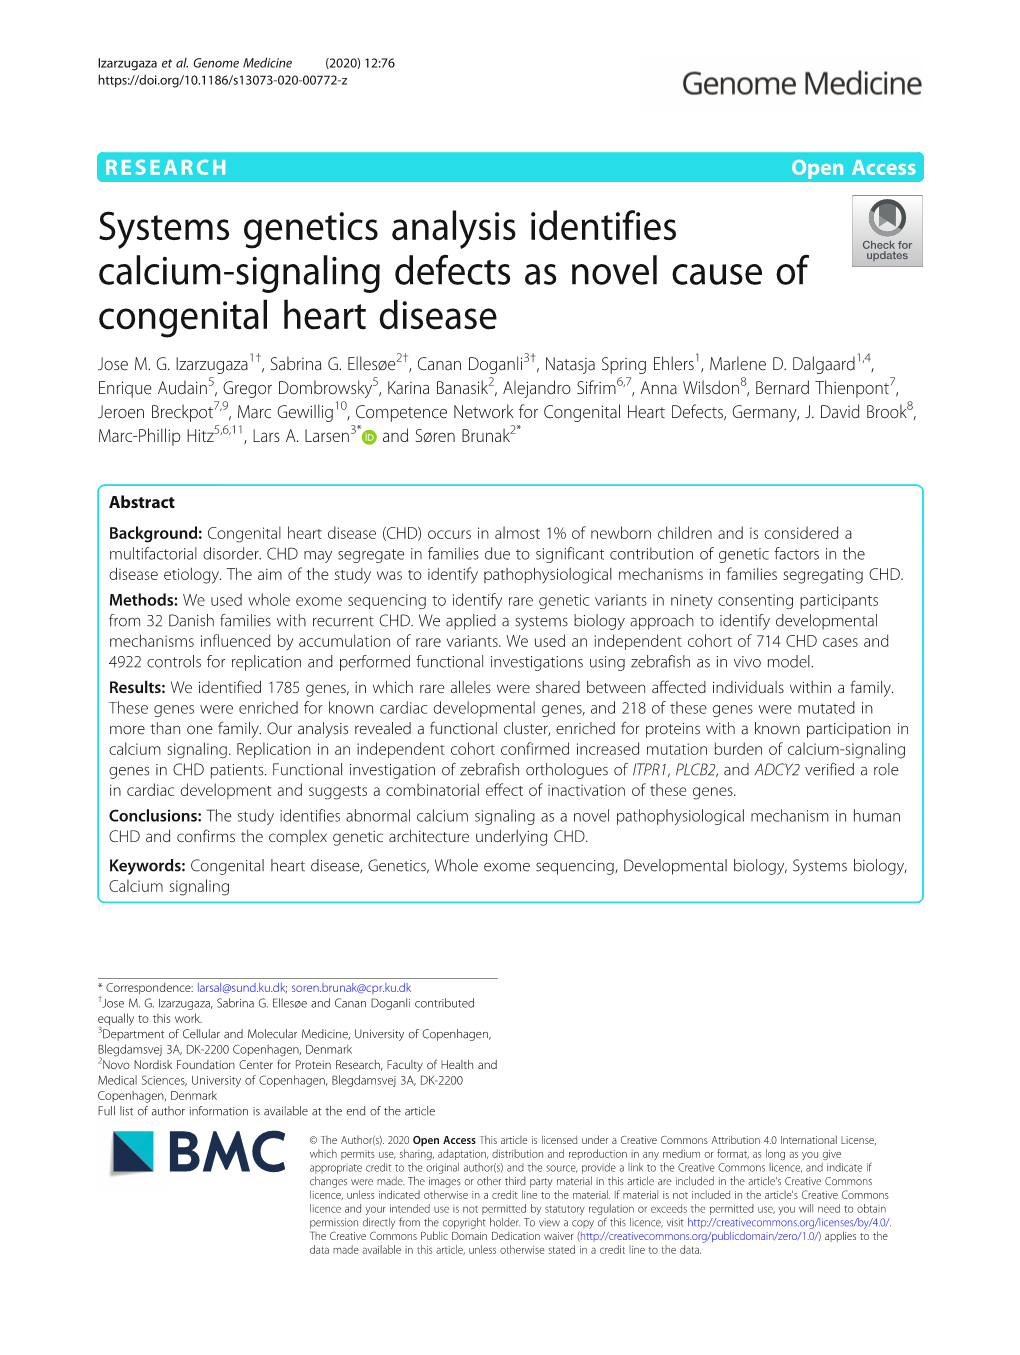 Systems Genetics Analysis Identifies Calcium-Signaling Defects As Novel Cause of Congenital Heart Disease Jose M